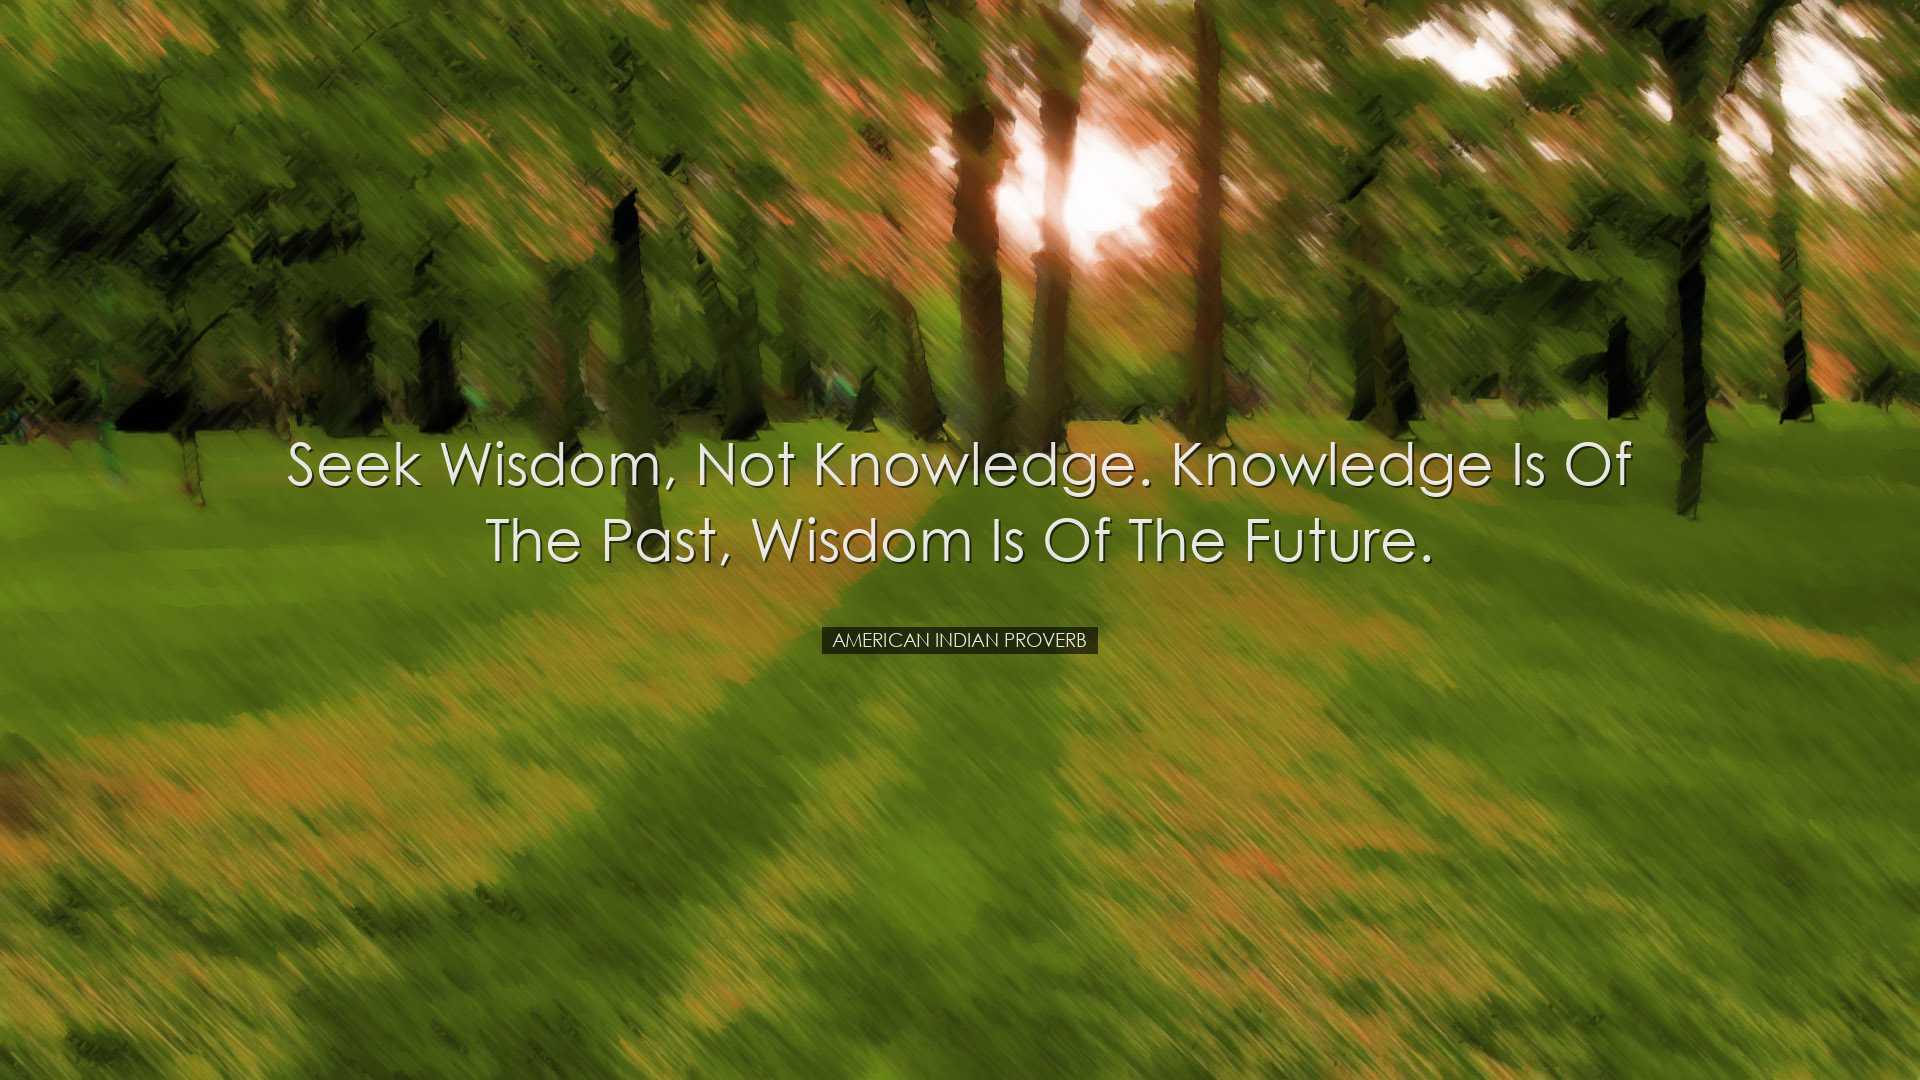 Seek wisdom, not knowledge. Knowledge is of the past, Wisdom is of